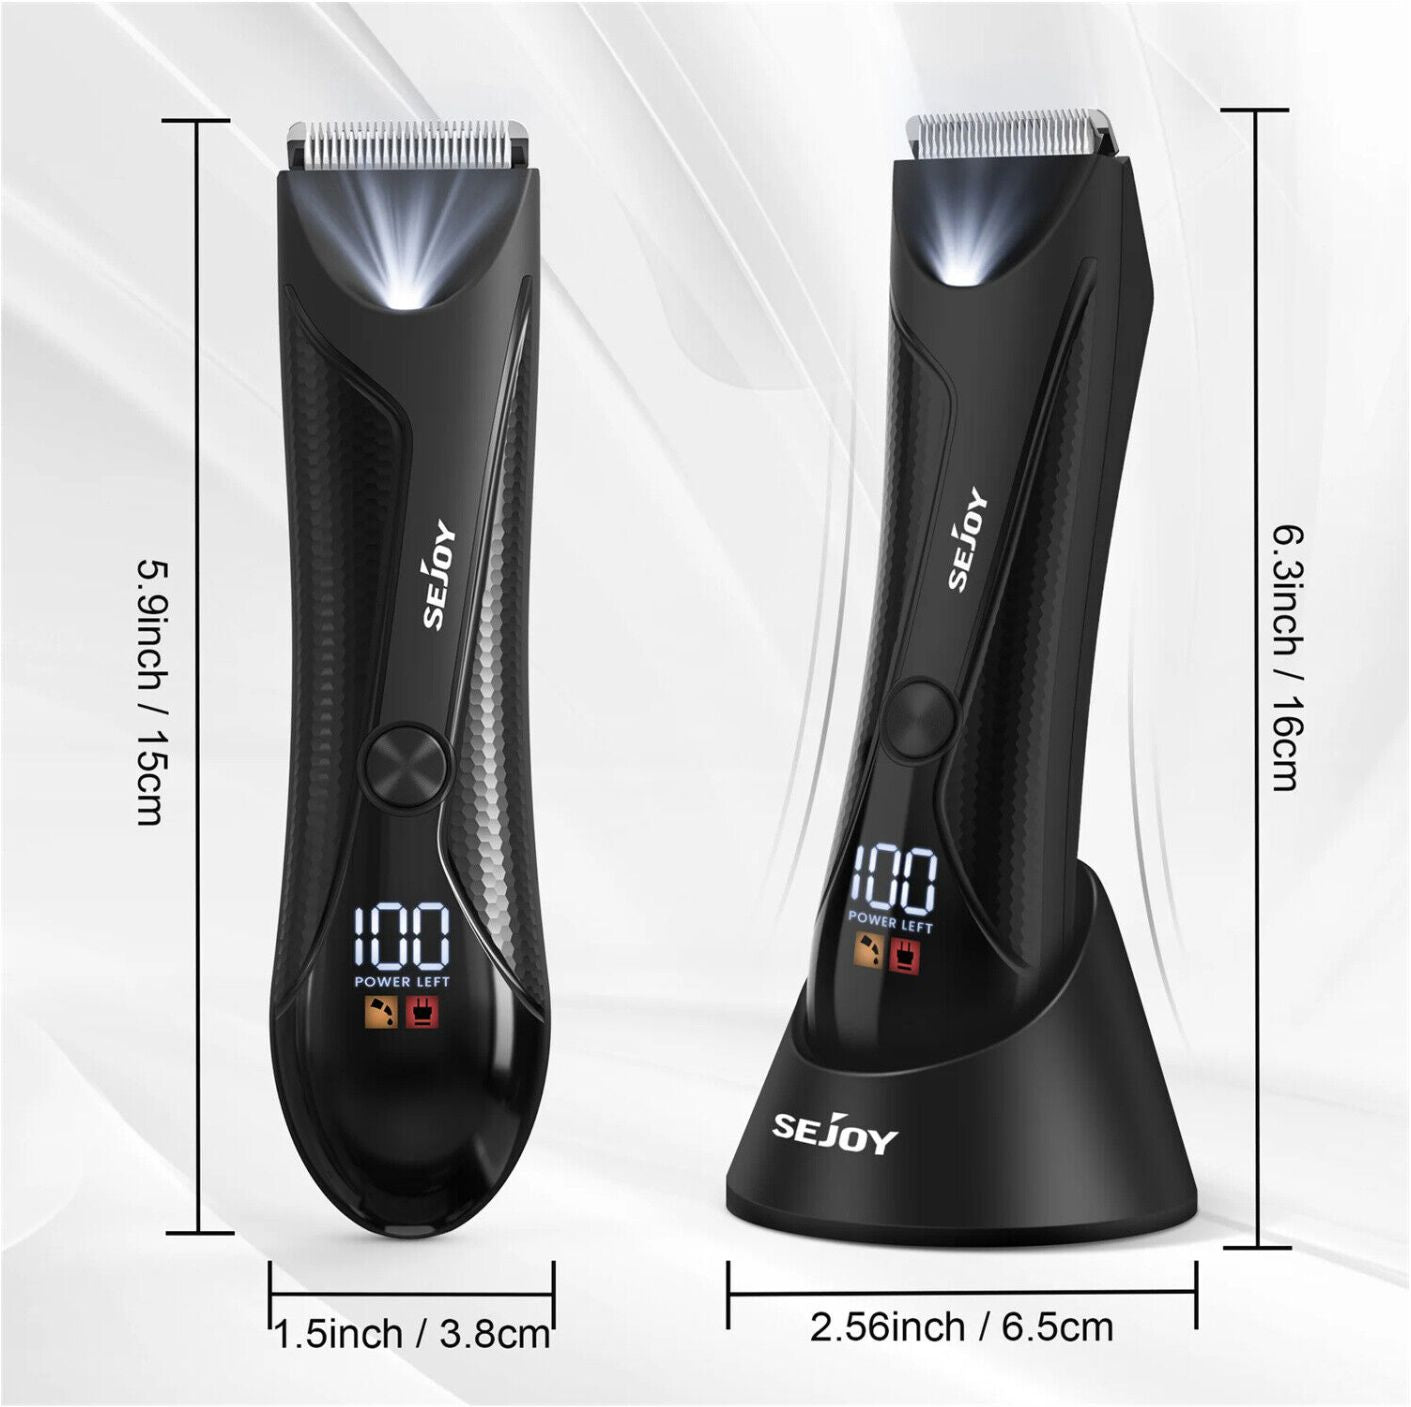 SEJOY Electric Pubic Hair Trimmer Waterproof LED Groin UNISEX Body Shaver Groomer